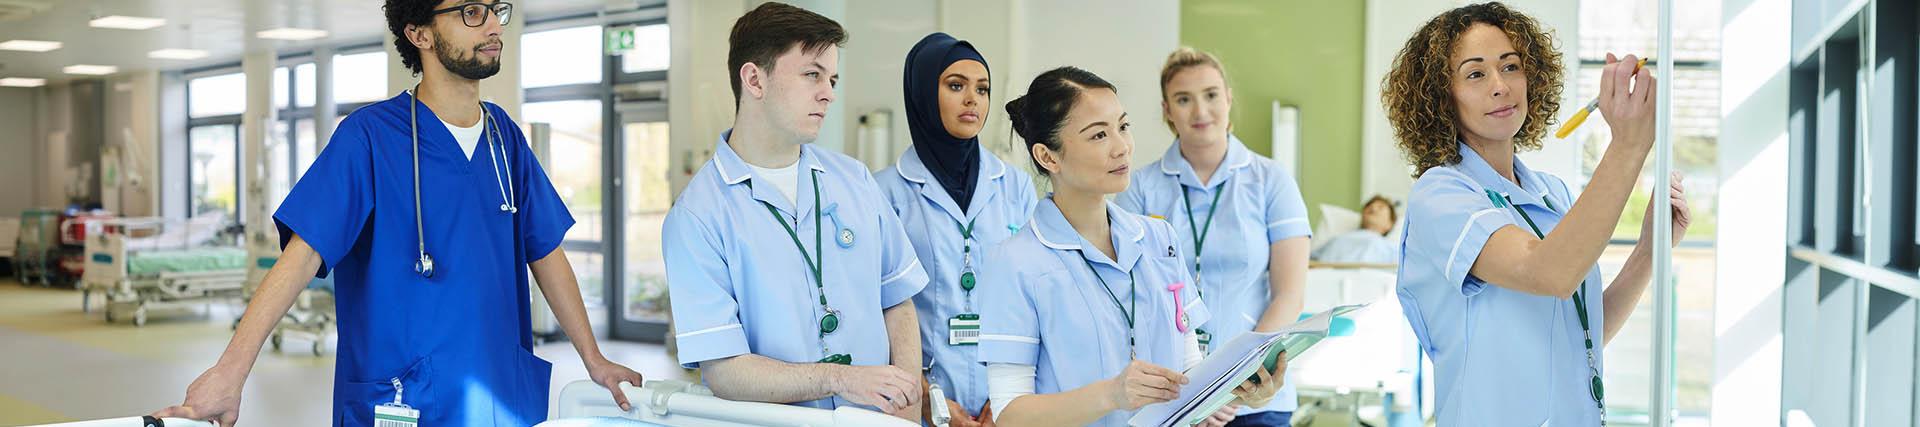 A mixed group of student nurses wearing blue uniforms